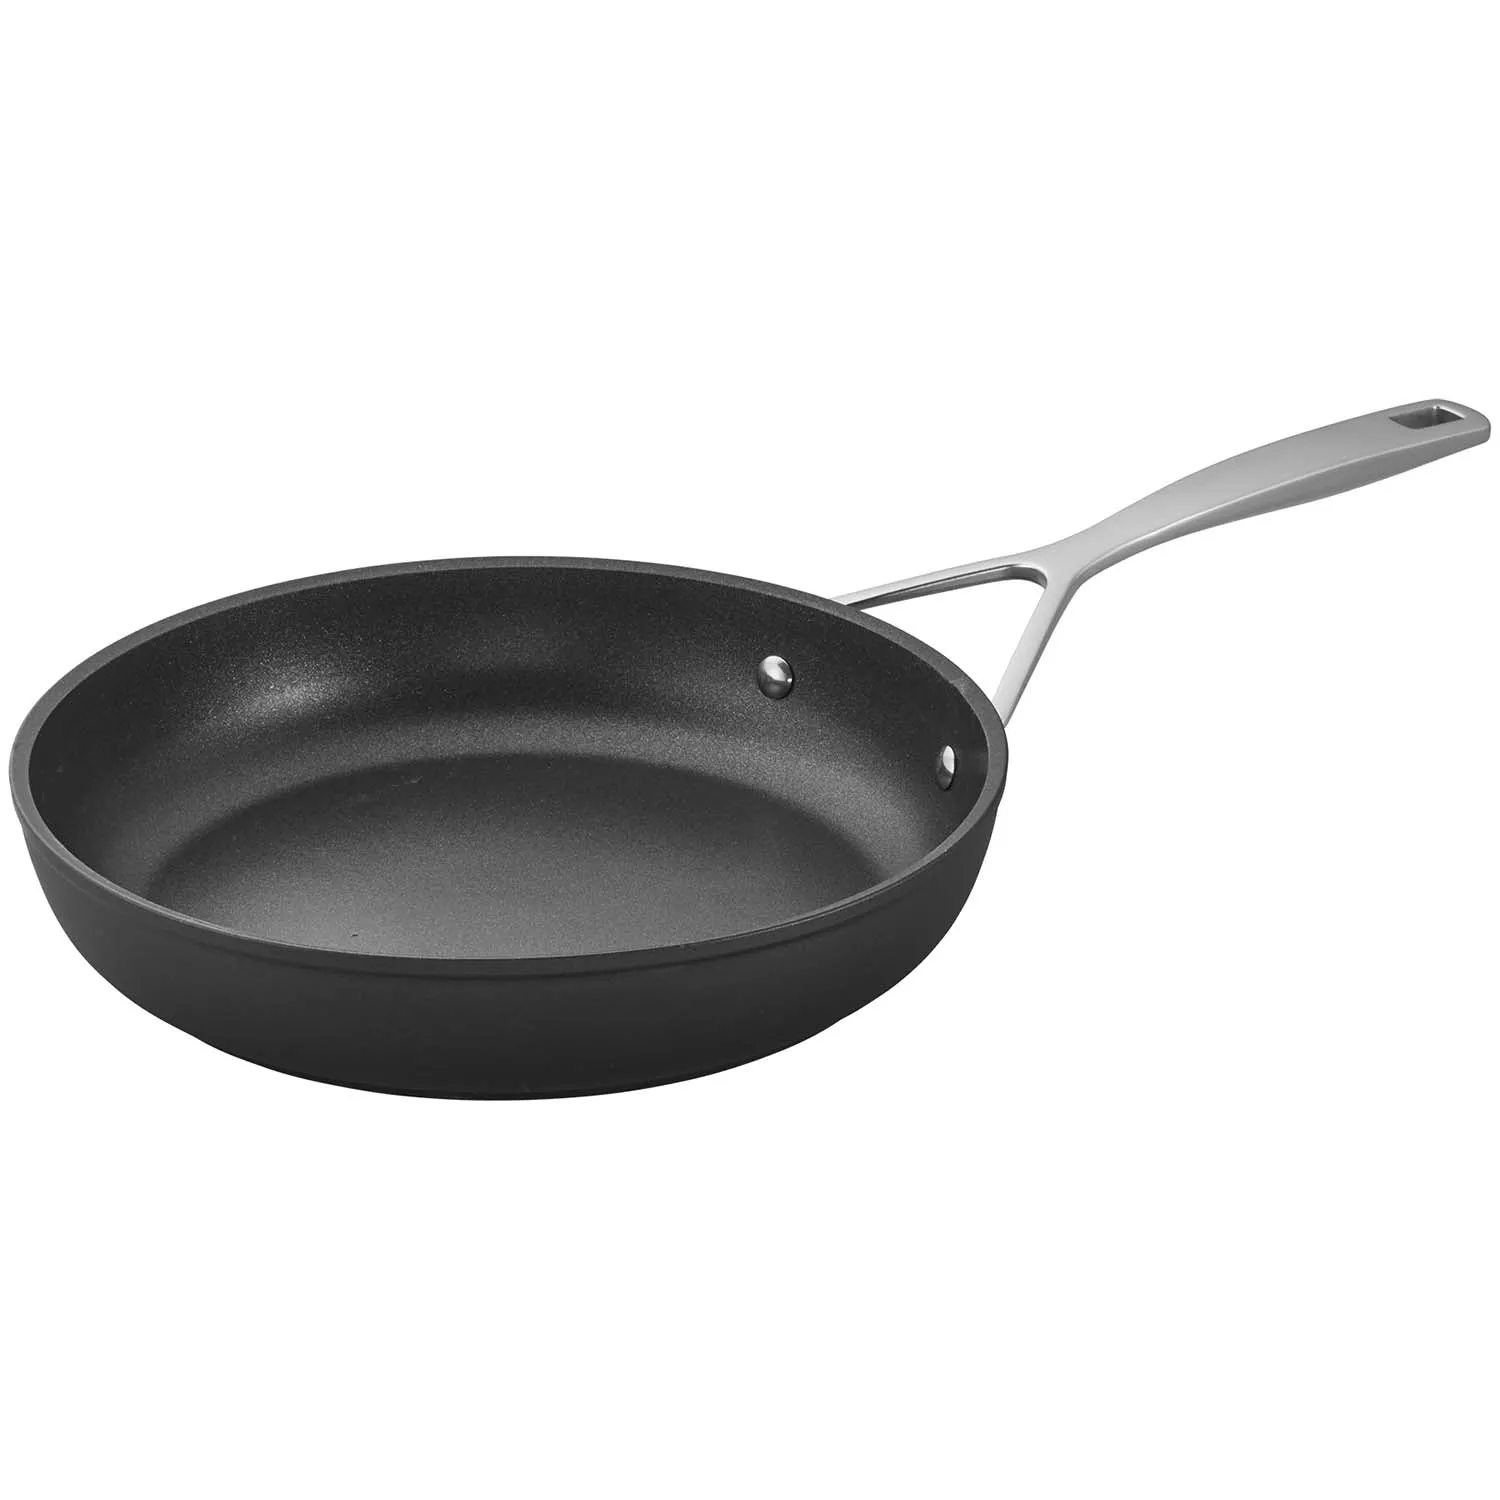 Proline 2 Pk - 8 in and 10 in Nonstick Fry Pan Set